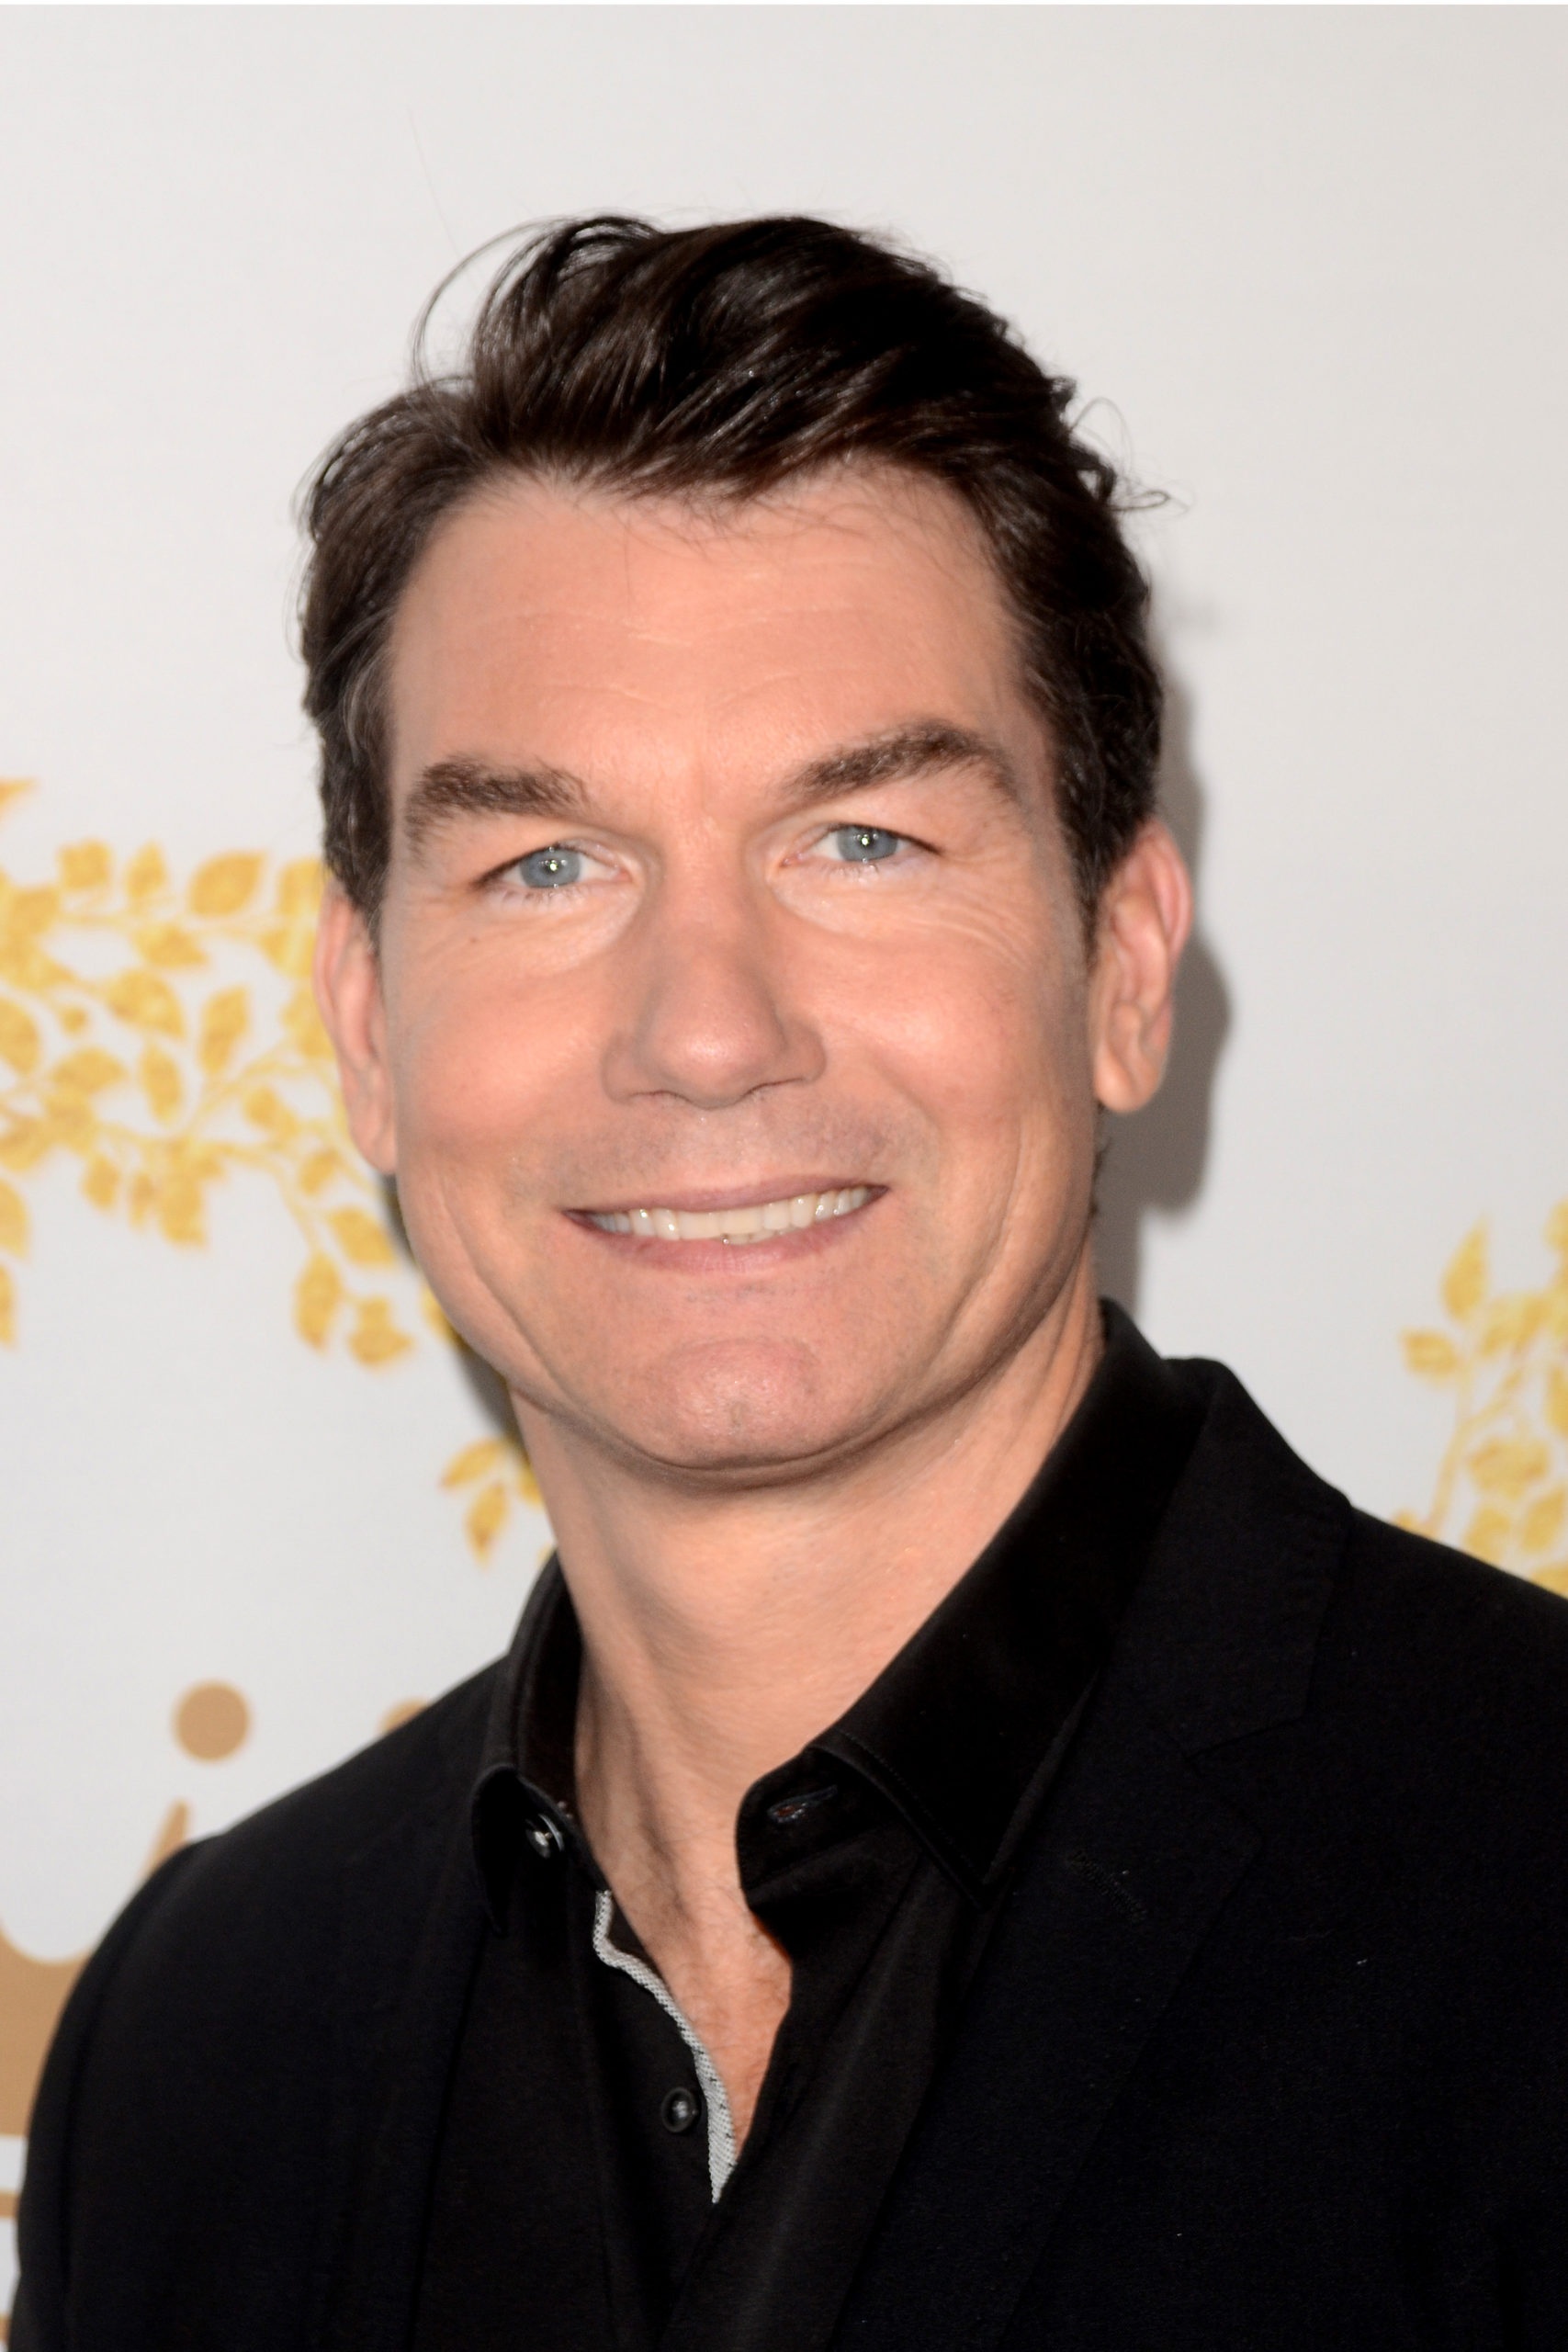 Valley Economic Alliance Books Comedian Jerry O’Connell to Emcee Annual Gala